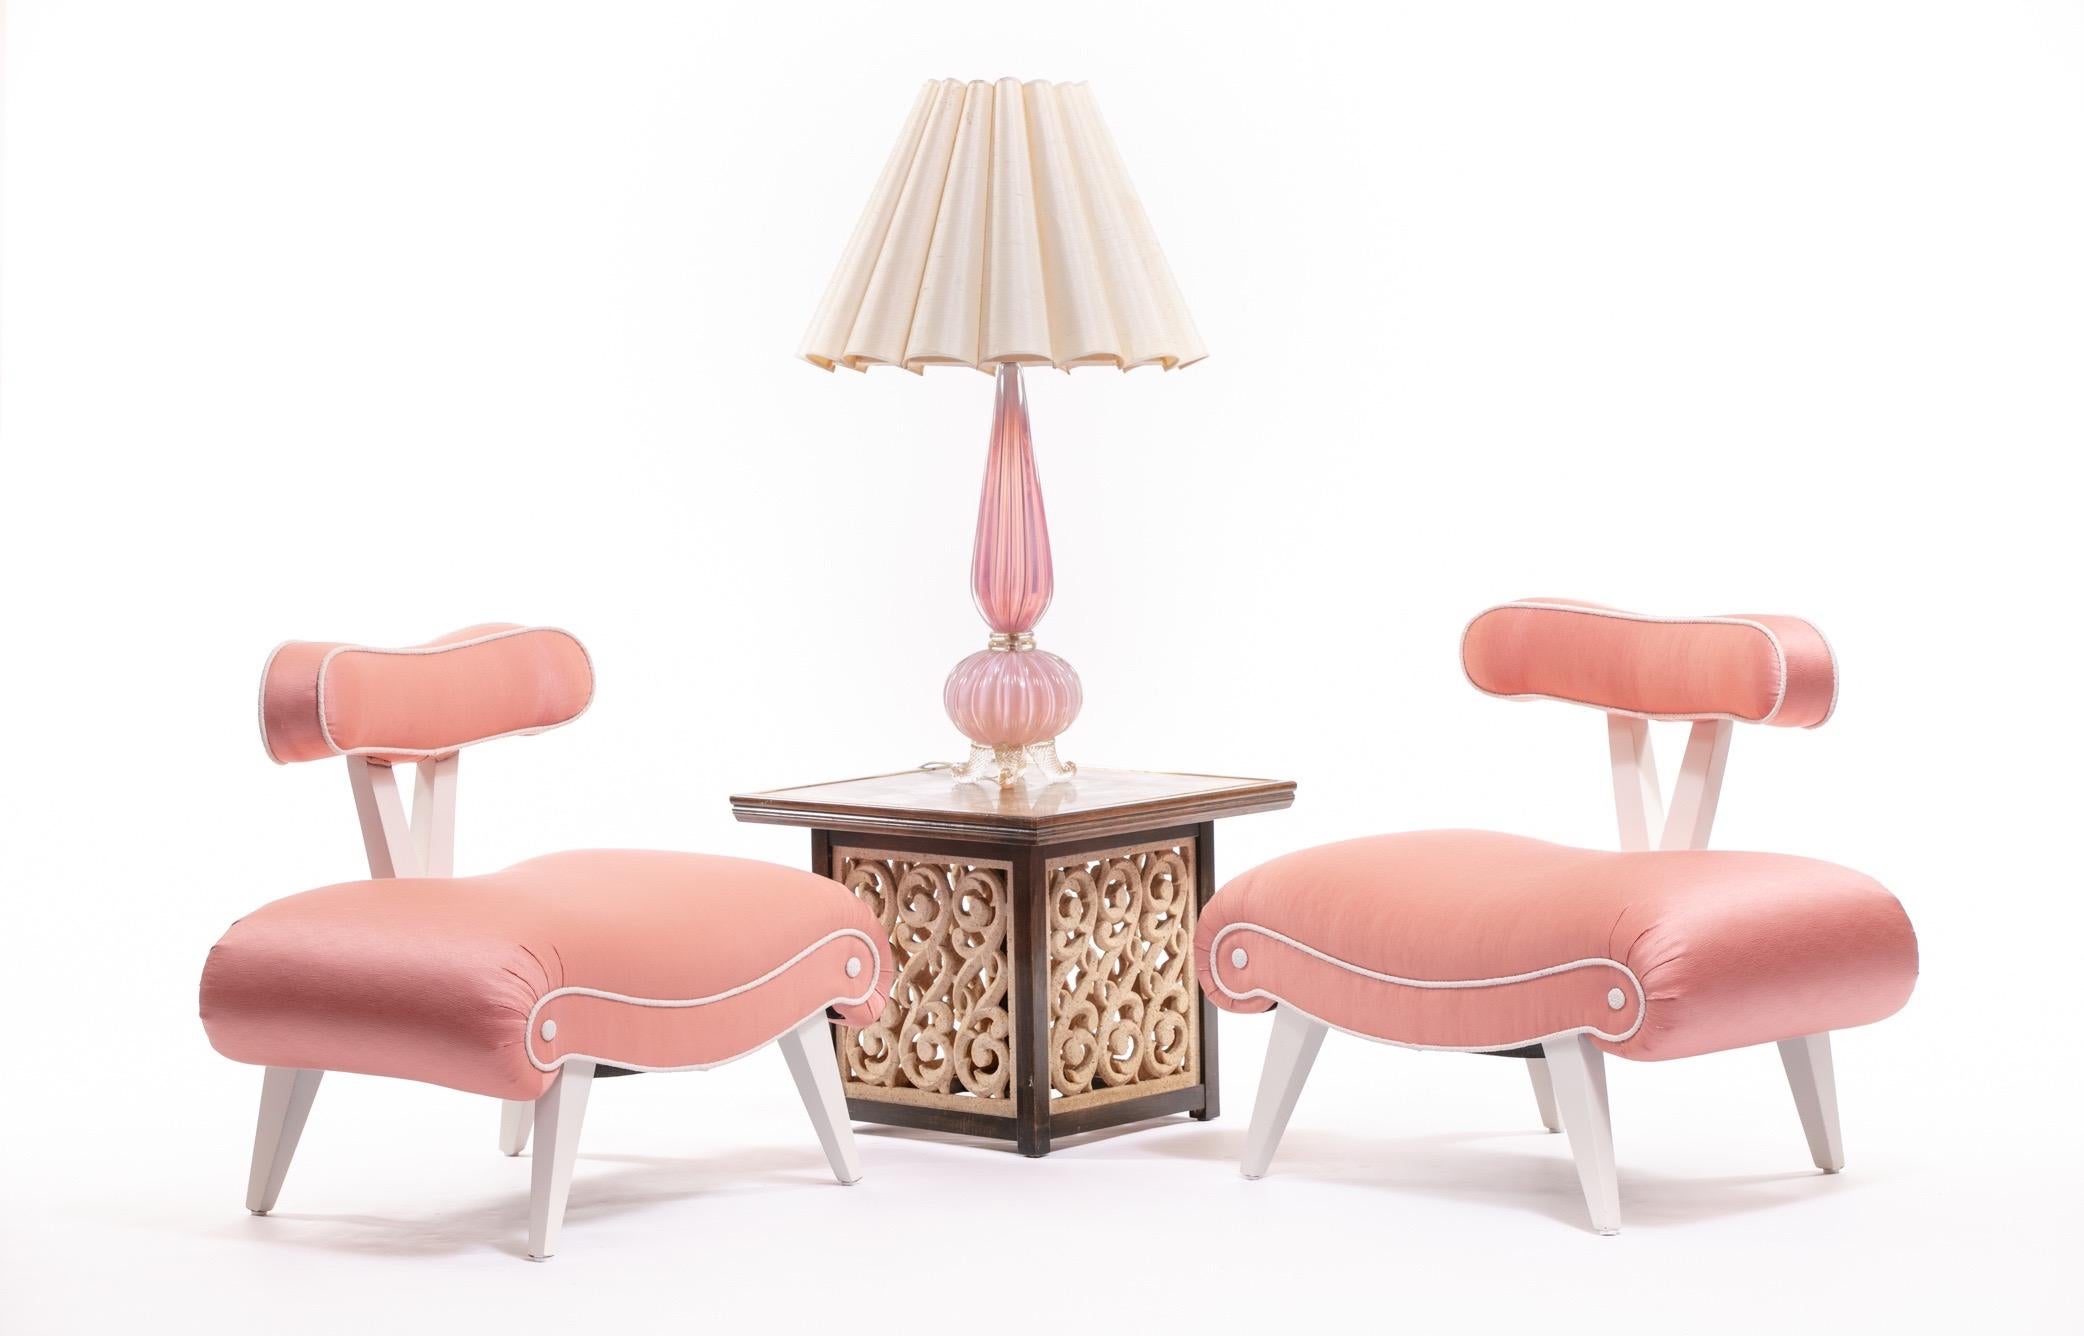 To die for, right? So Barbie. The curves... accentuated in Pink-Peach satin luster, highlighted by ivory bouclé piping detail and ivory bouclé tufts. Luxurious wide seats freshly and perfectly padded for comfort. And iconic. These Hollywood Regency